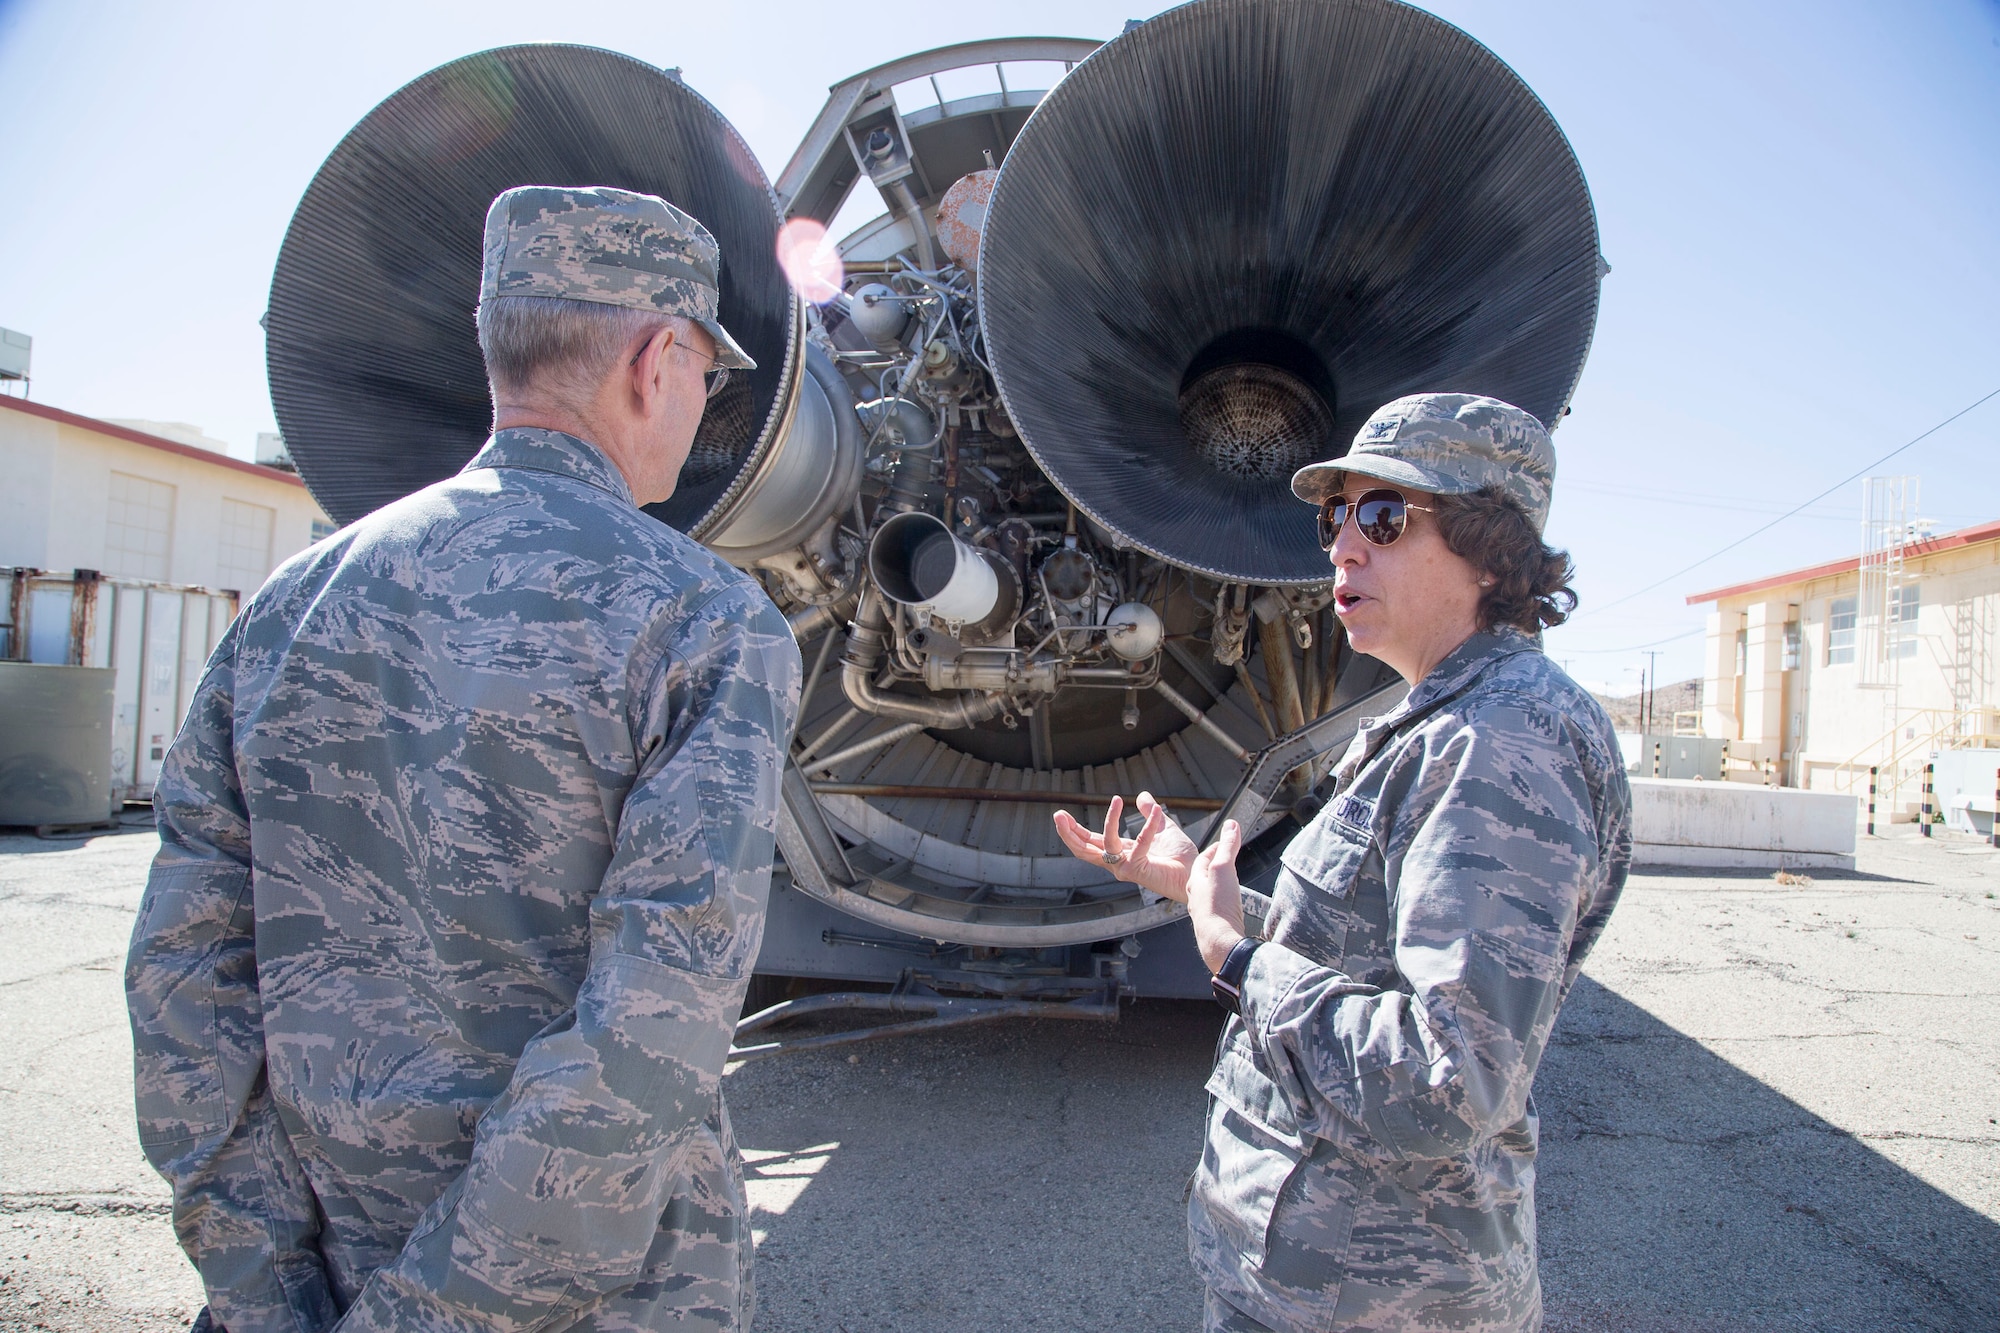 Photos of Lt. Gen. Mark Ediger, U.S. Air Force Surgeon General, and entourage on a tour of various facilities on and around Edwards Air Force Base